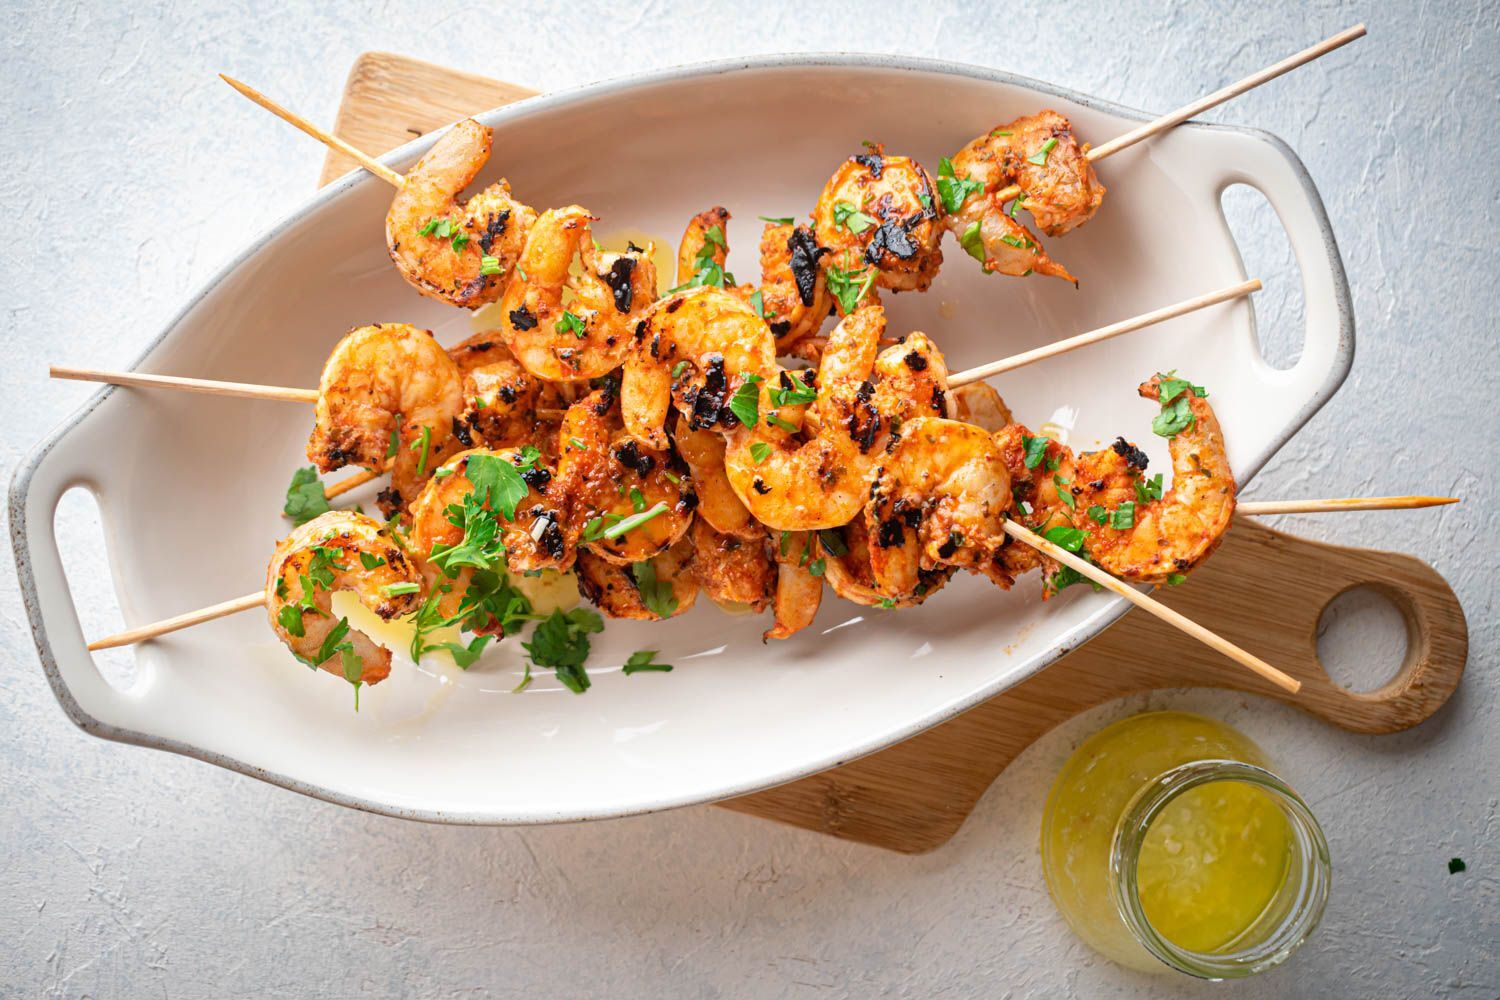 Garlic grilled shrimp on wooden skewers with spices, lemon juice, and melted butter.